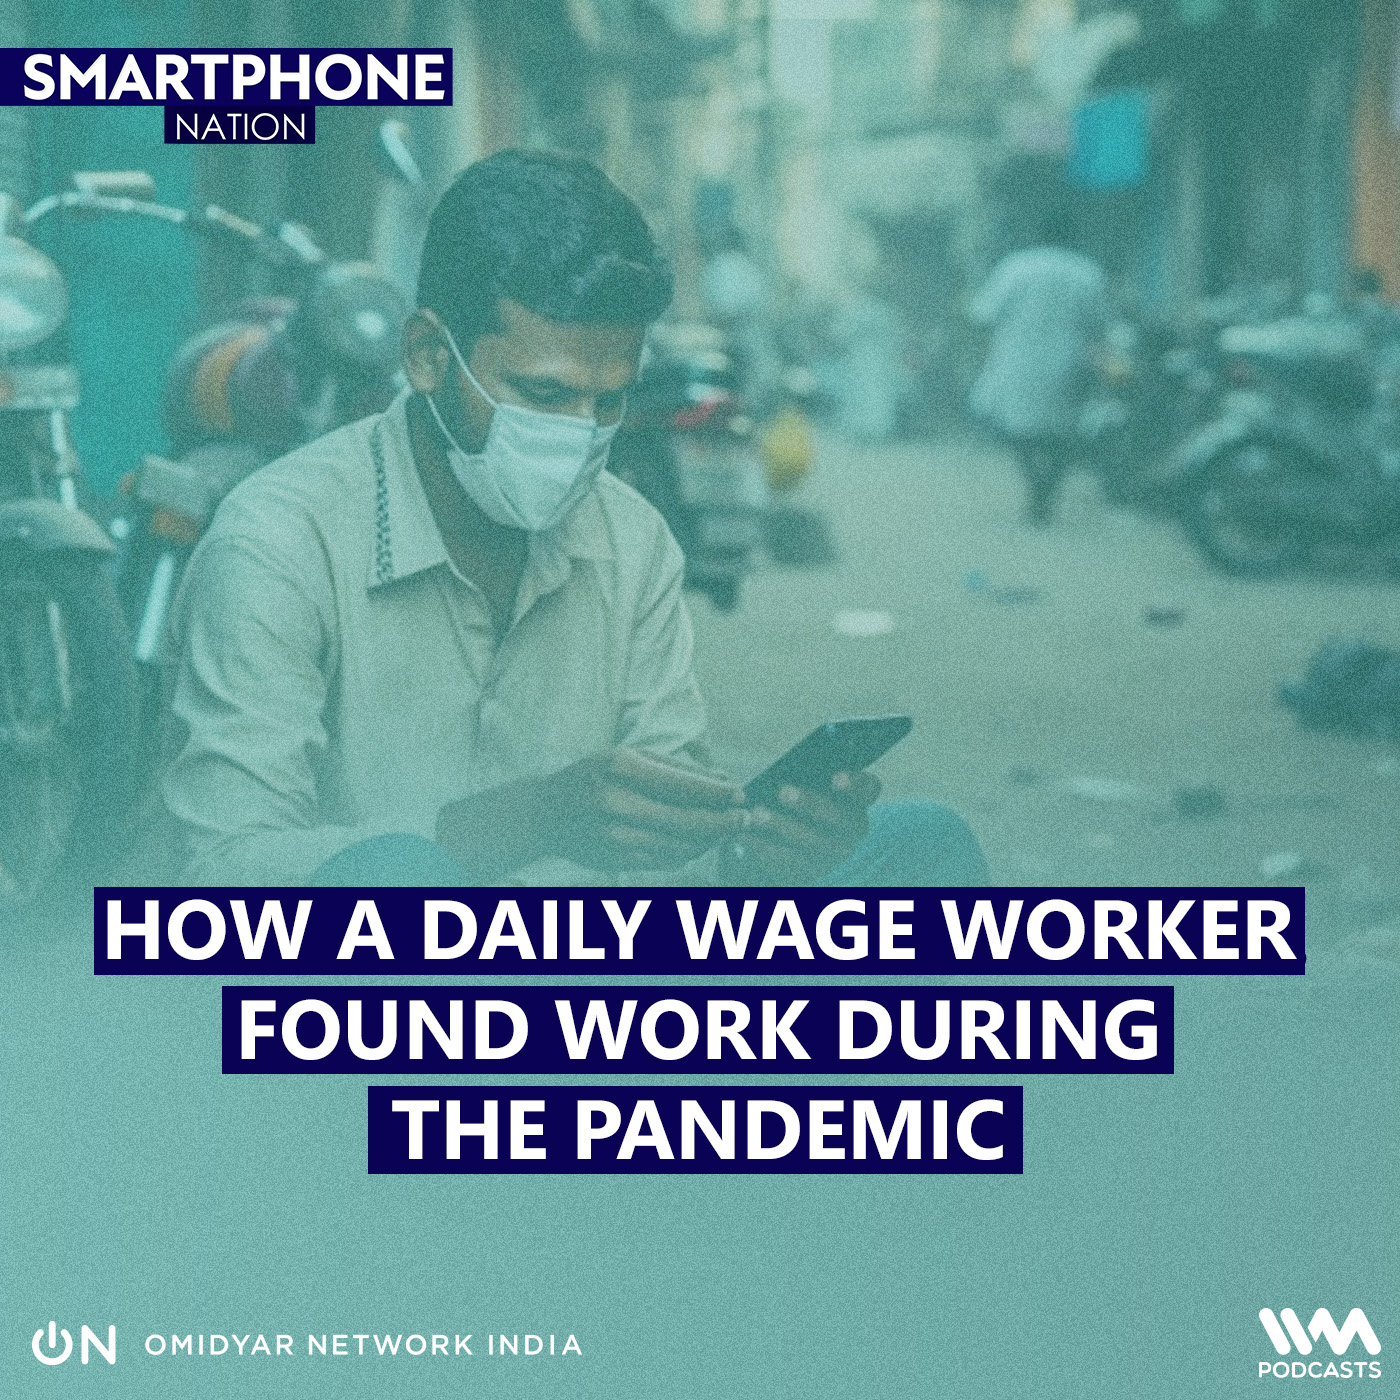 How a Daily Wage Worker found Work during the Pandemic